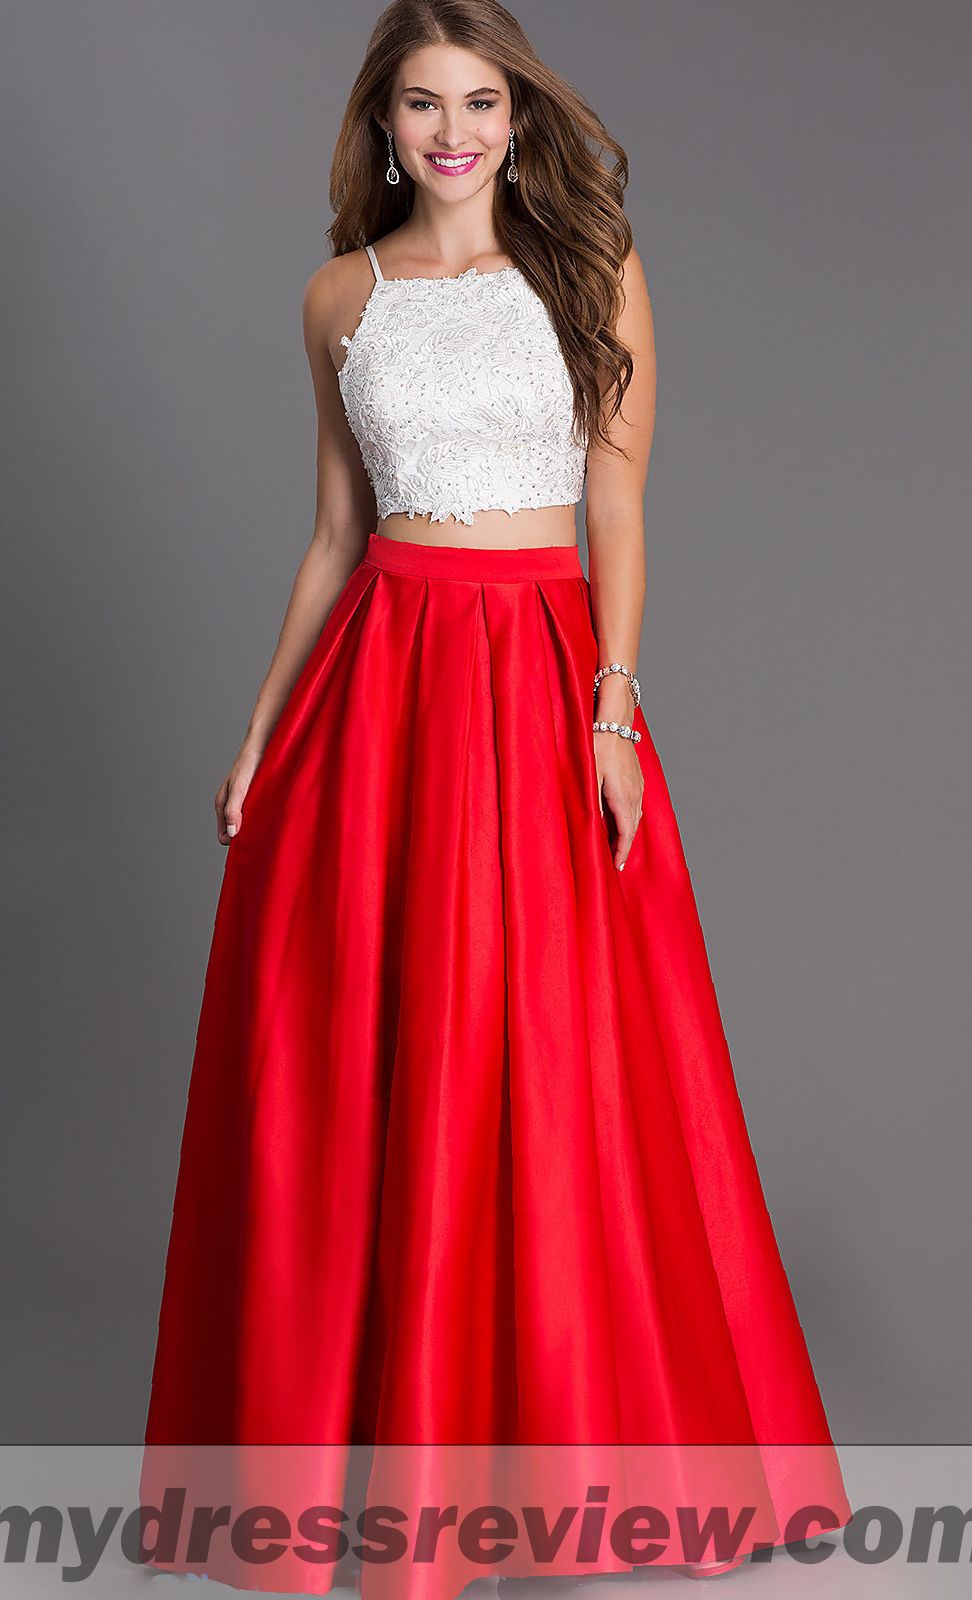 Red And Black Two Piece Prom Dress And Review 2017 - MyDressReview